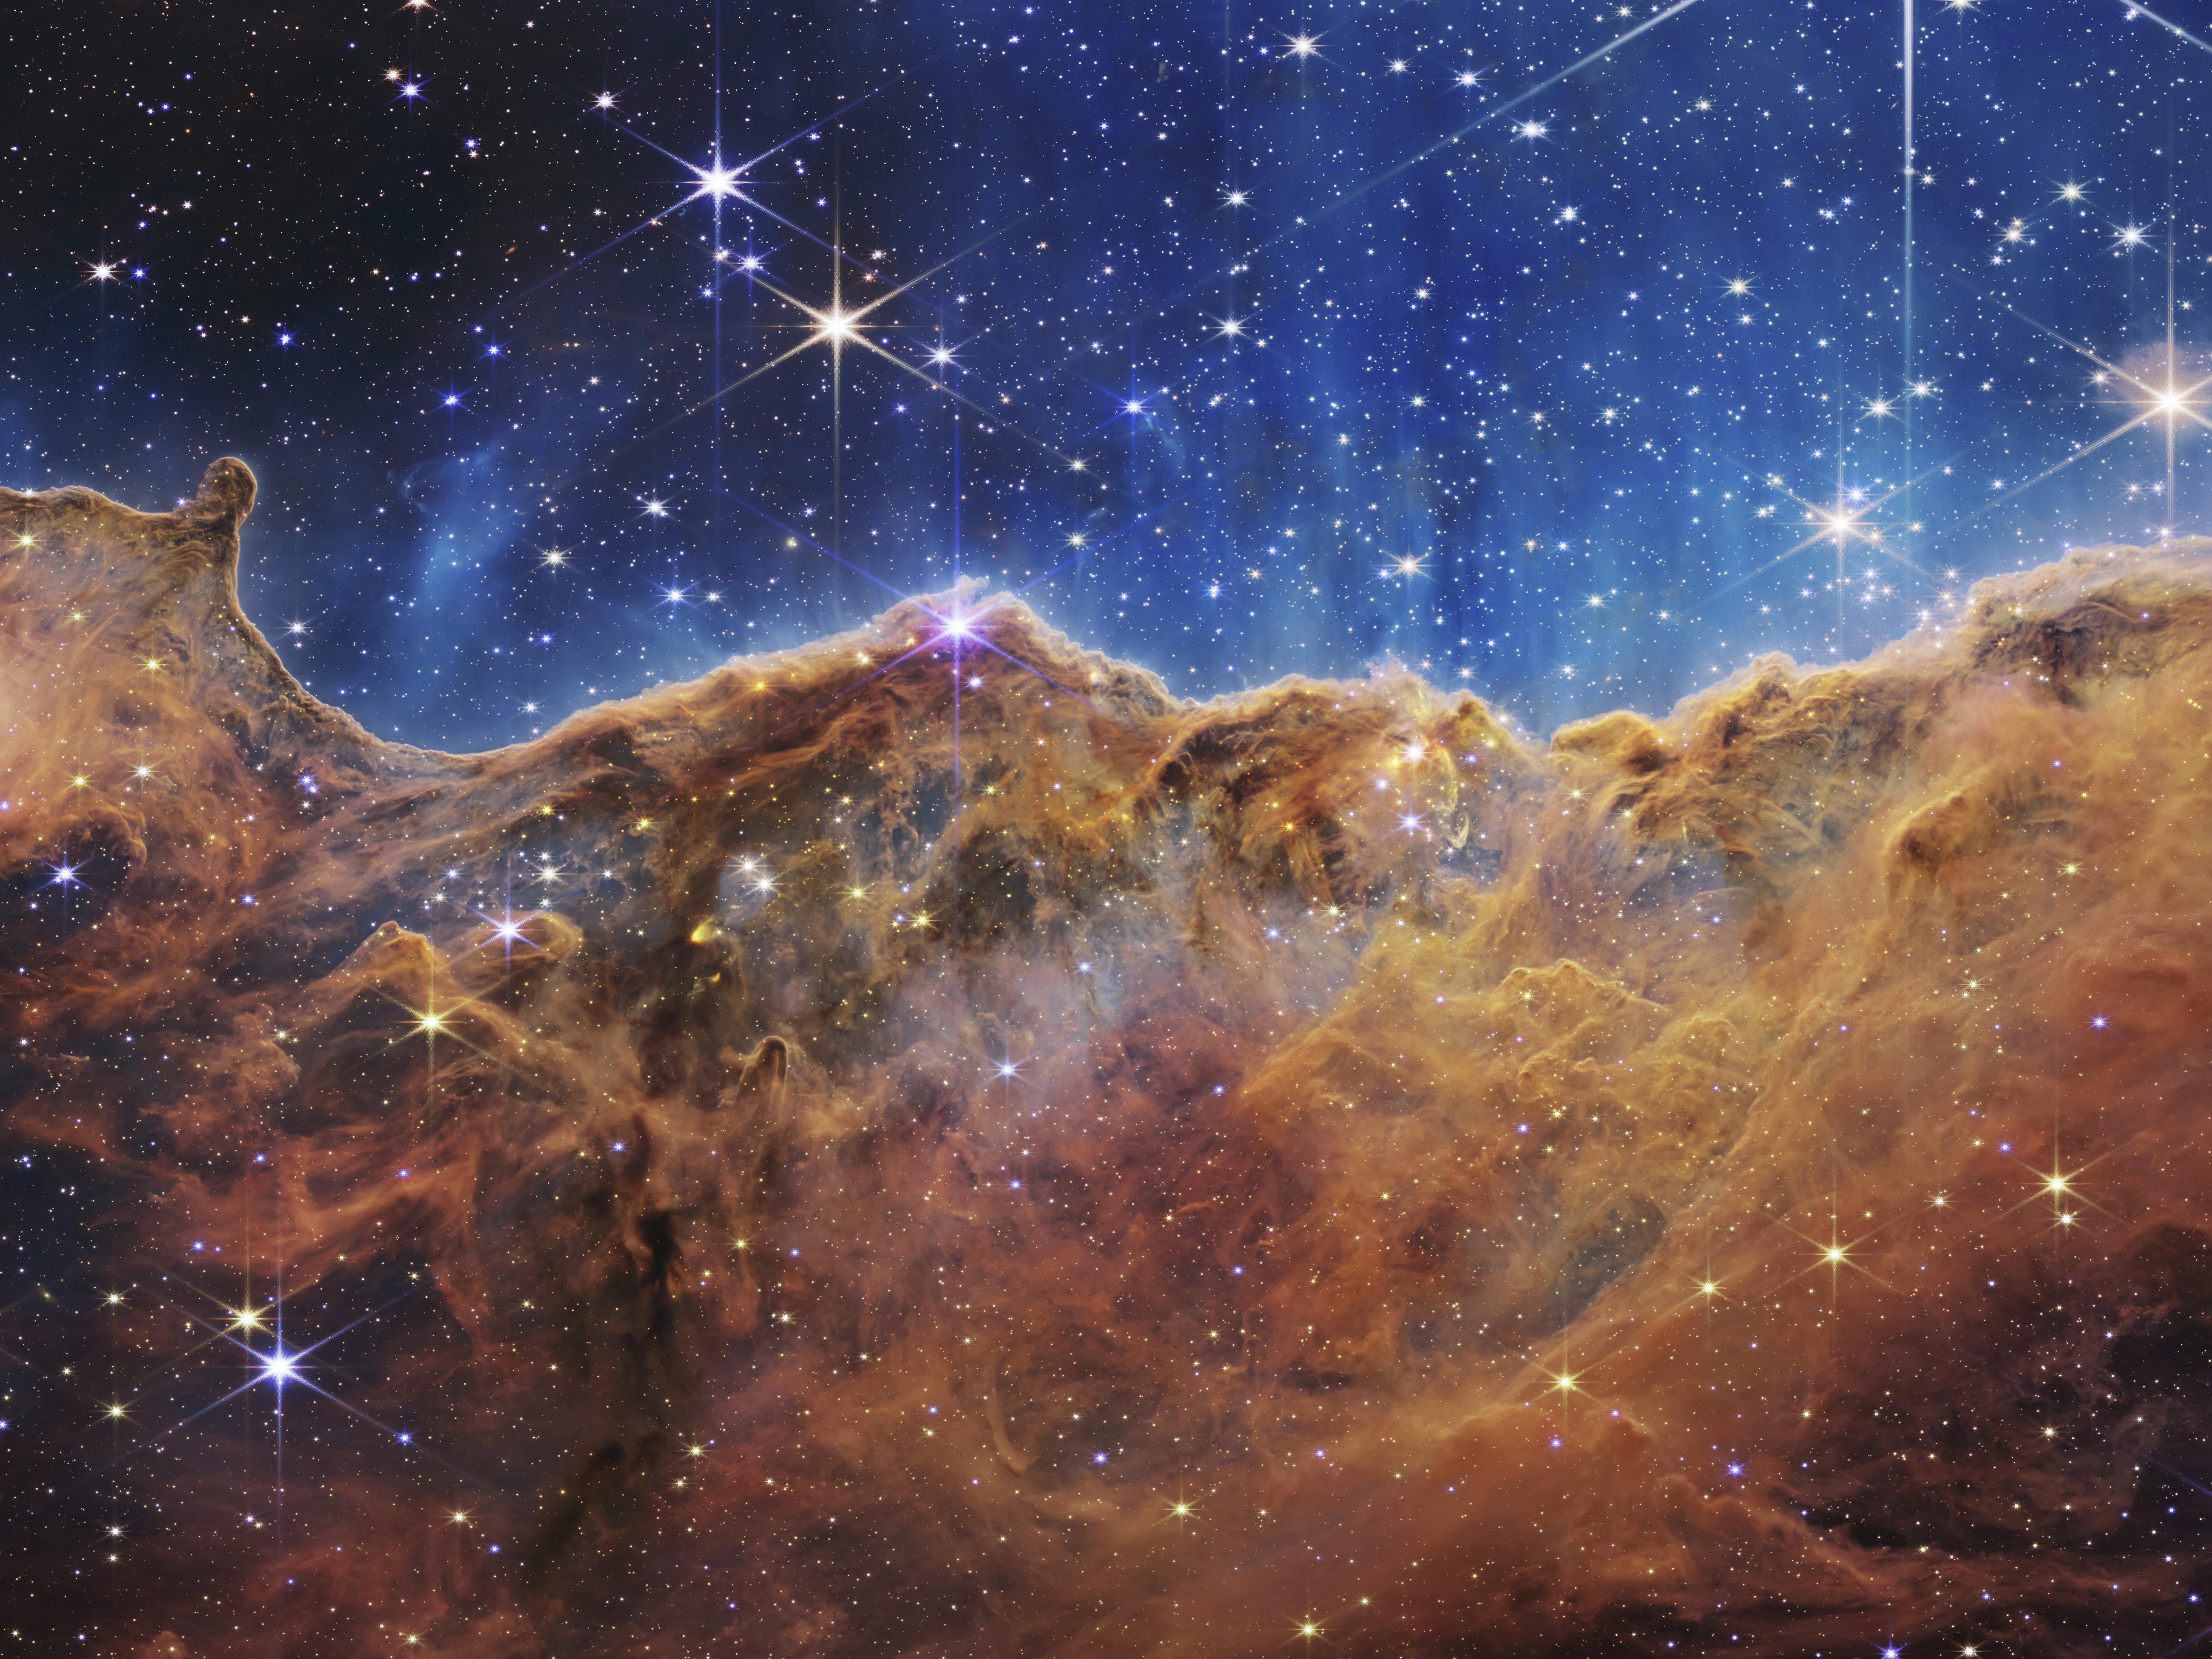 Colorful Lion Spirit In Space Nebula
 Wallpapers